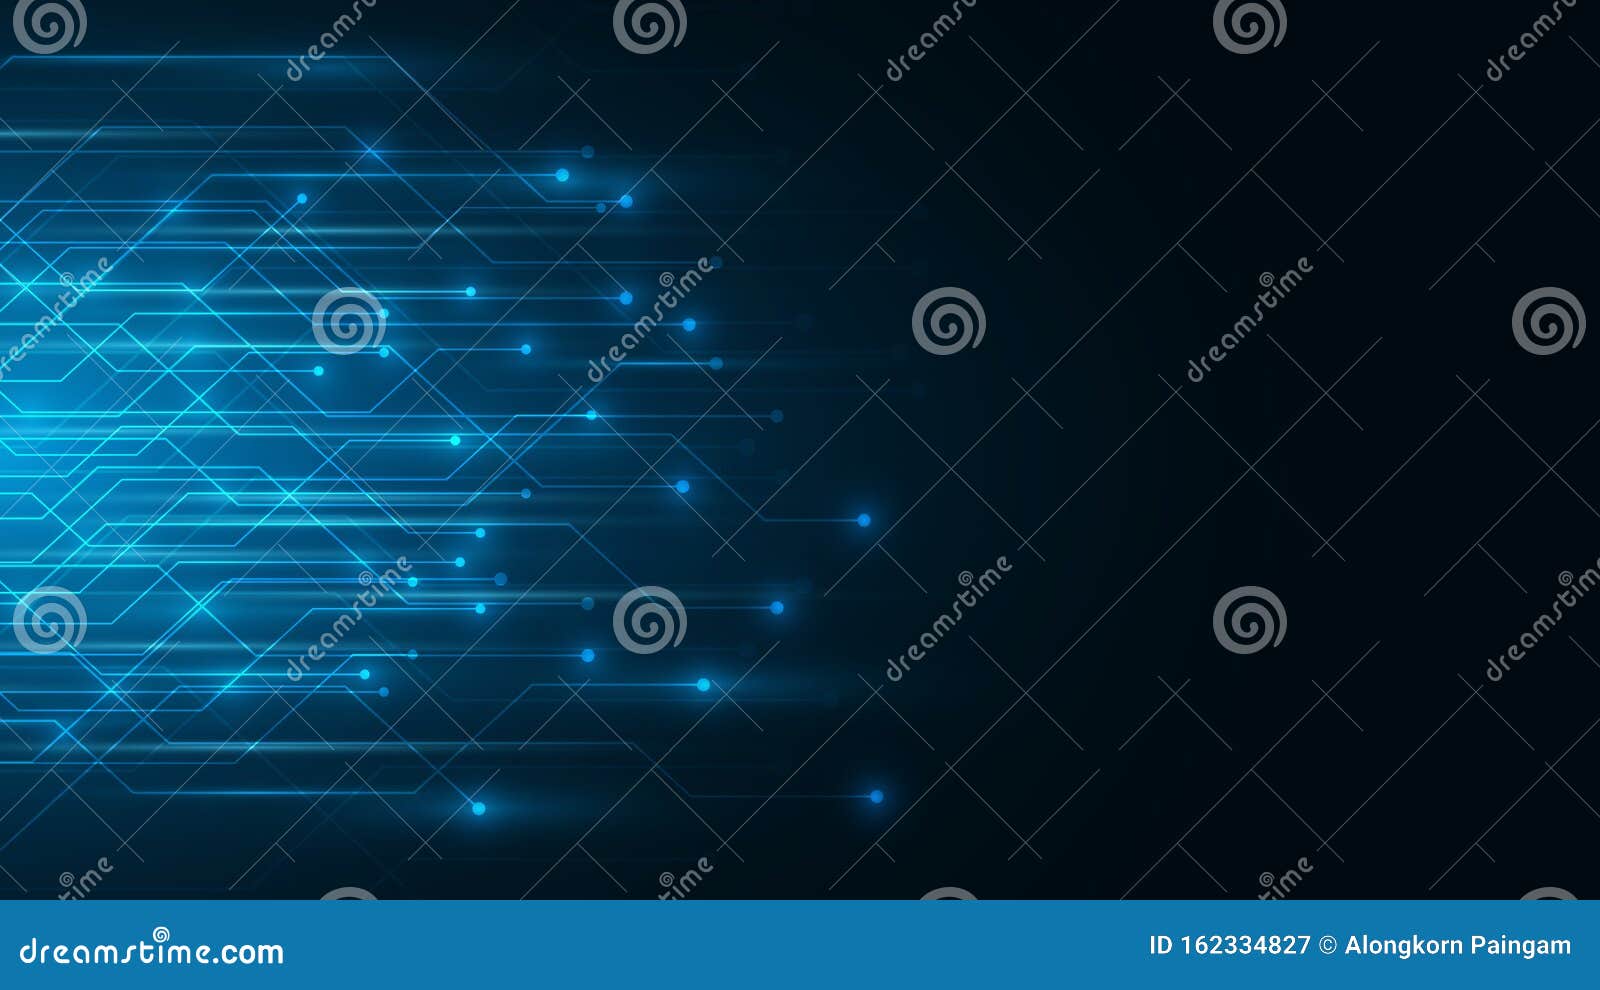 blue abstract technology cyberspace background,speed data transfer background,big data analysis concept